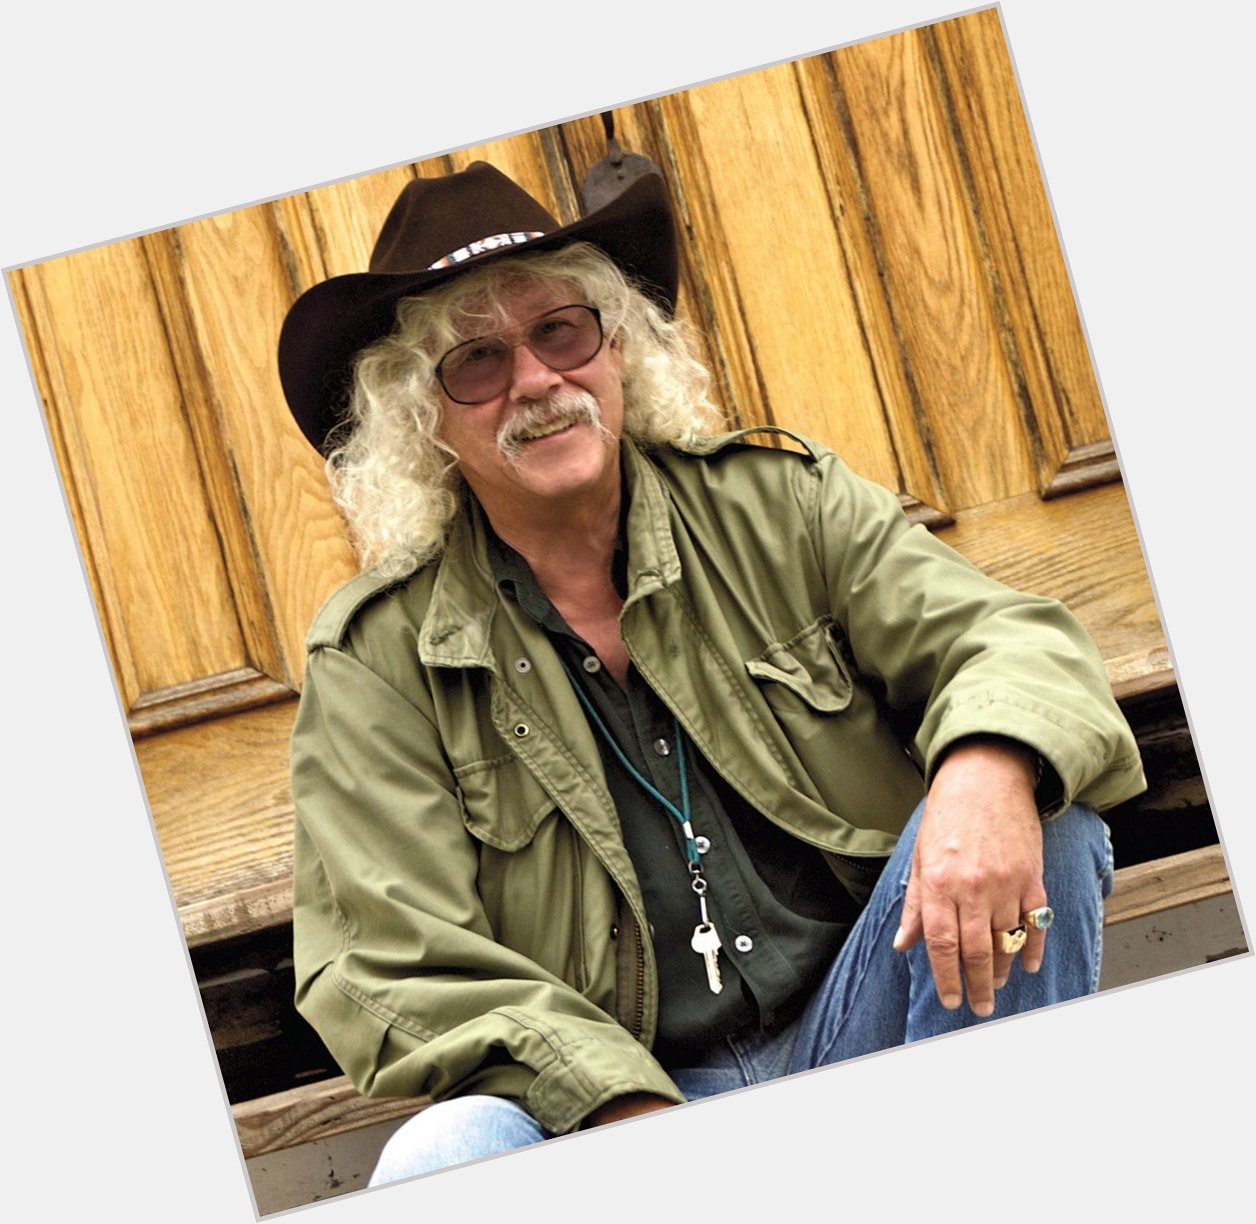   Happy 70th birthday to Arlo Guthrie today :-) 